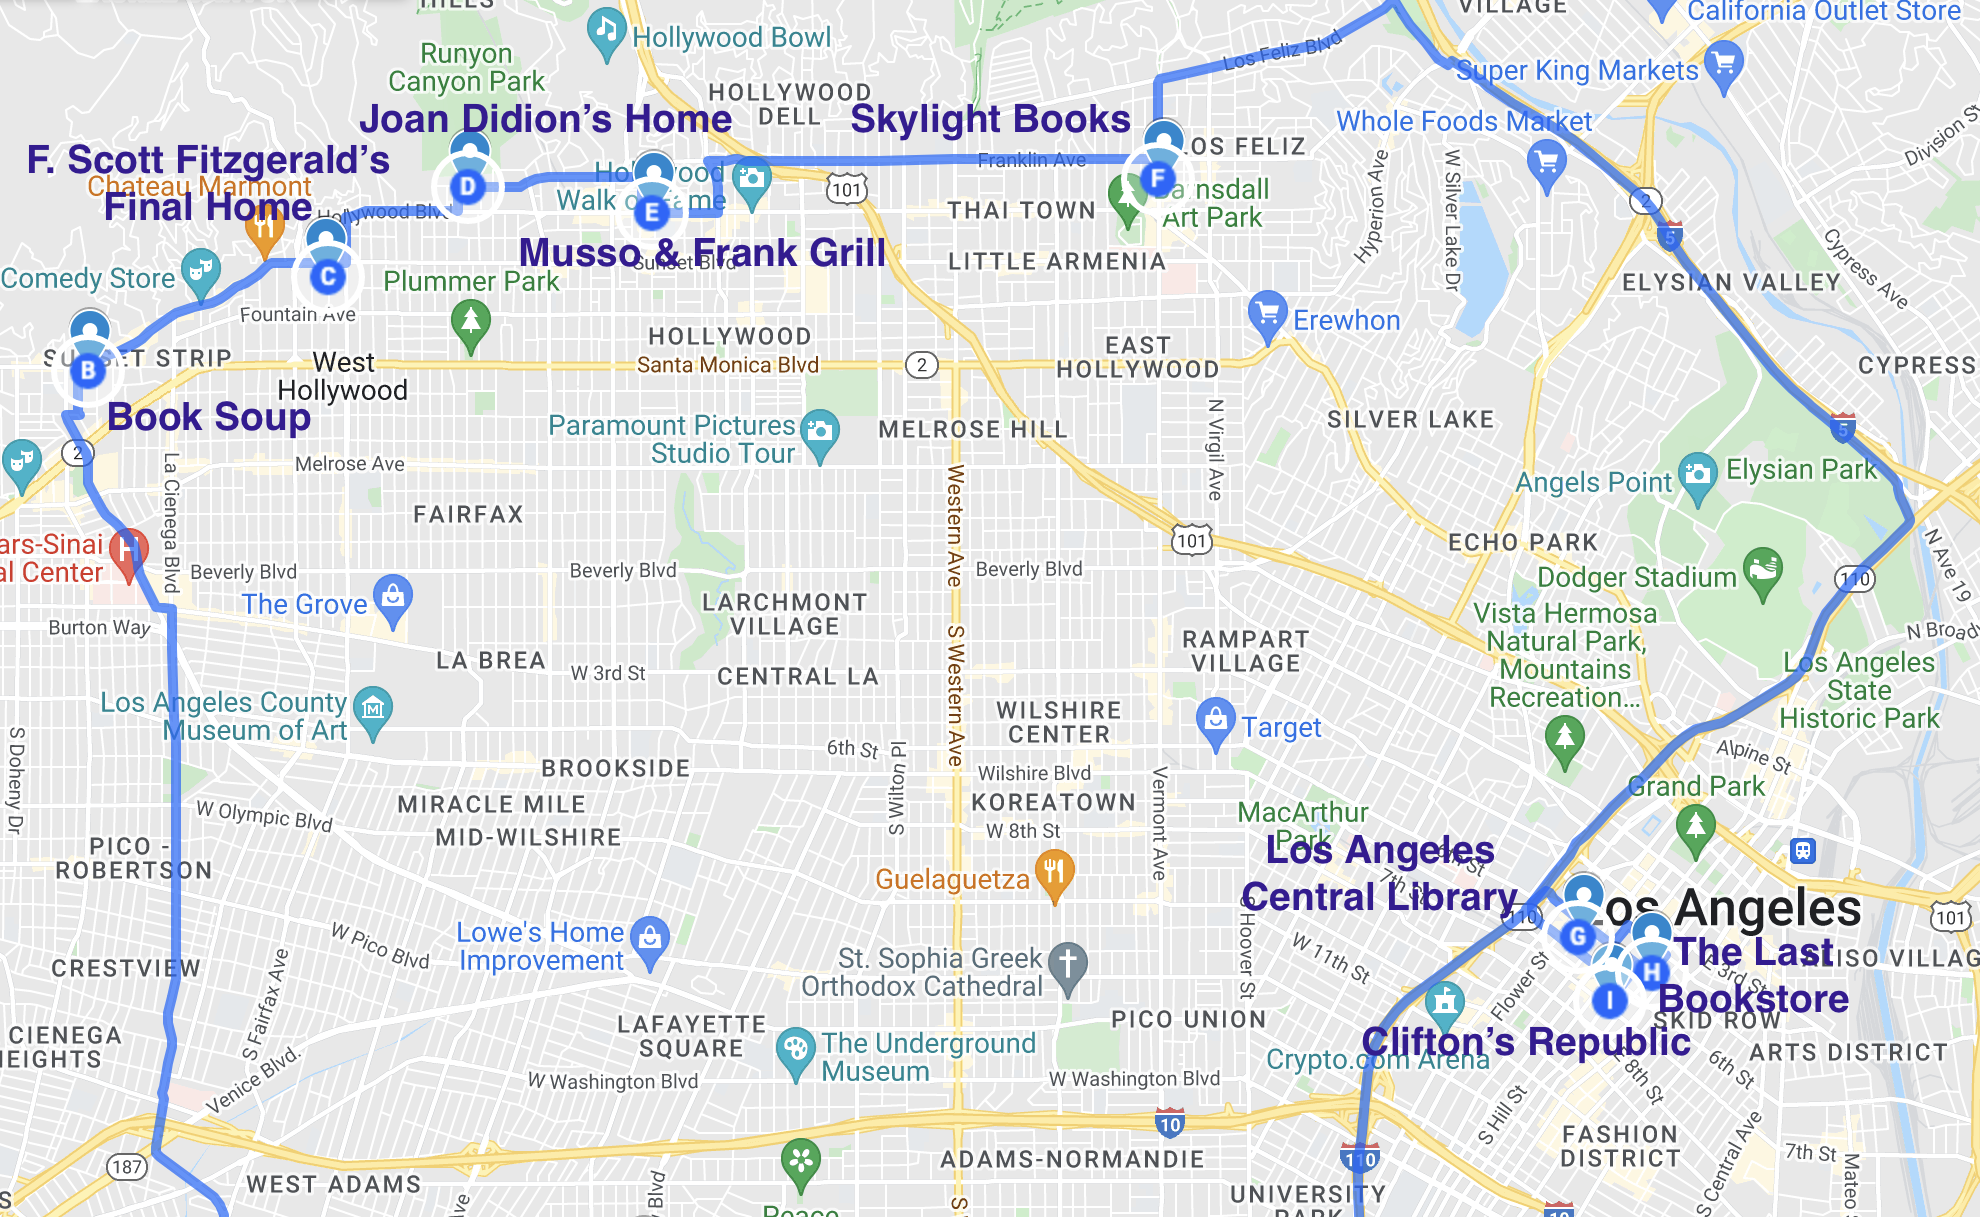 map of literary spots in Los Angeles California